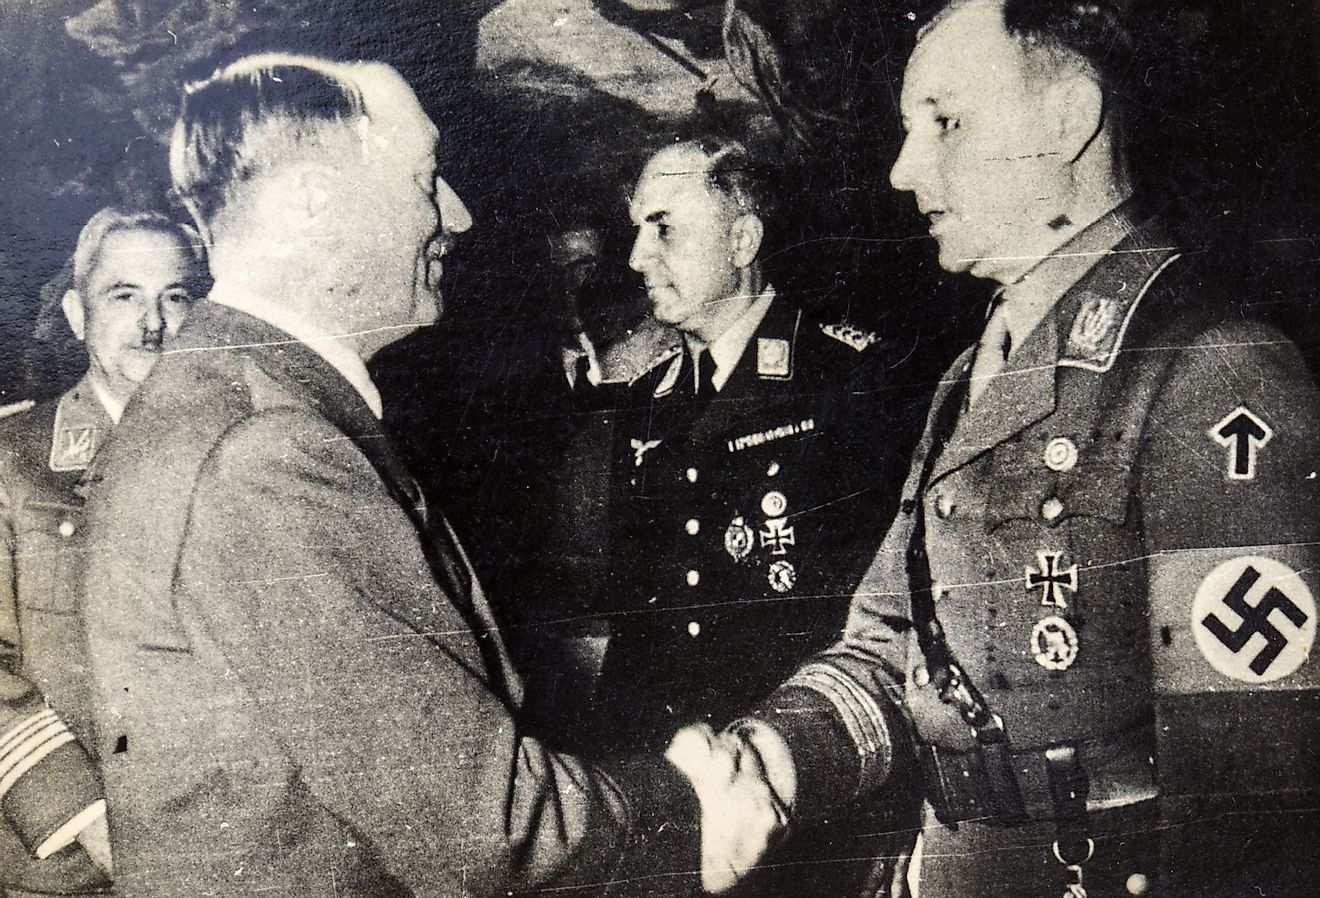 Adolf Hitler shakes hands with Victor Lutz, Chief of Staff of the SA after murder of Ernst Rohm. Image credit IgorGolovniov via Shutterstock